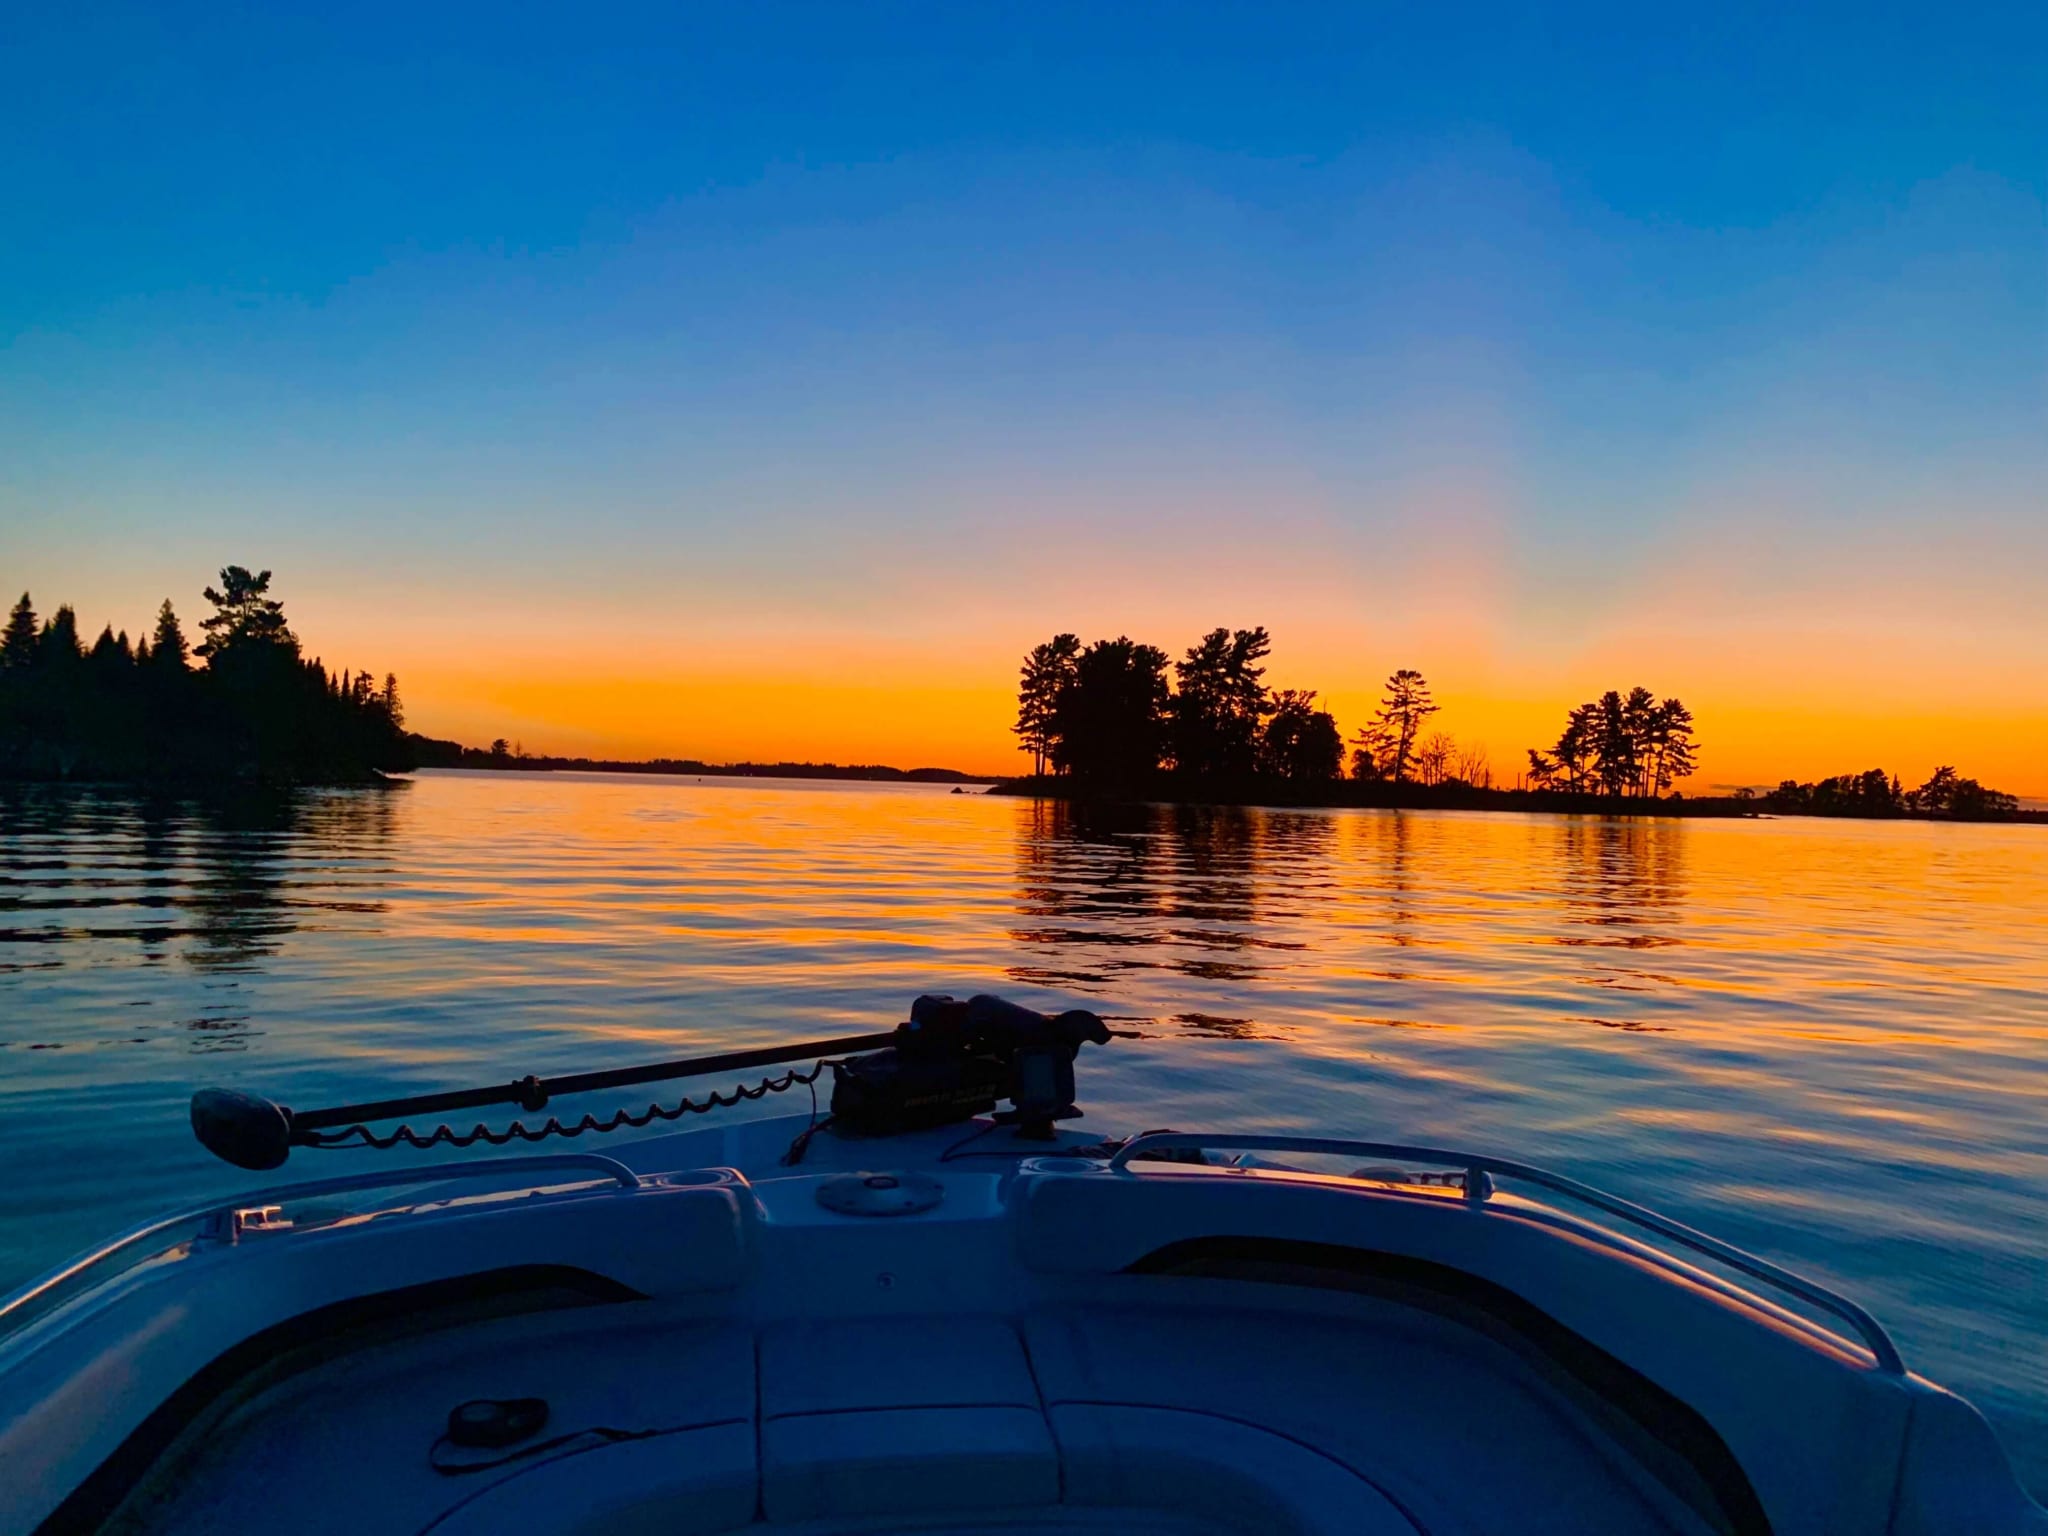 Watching the sunset in a boat on the lake